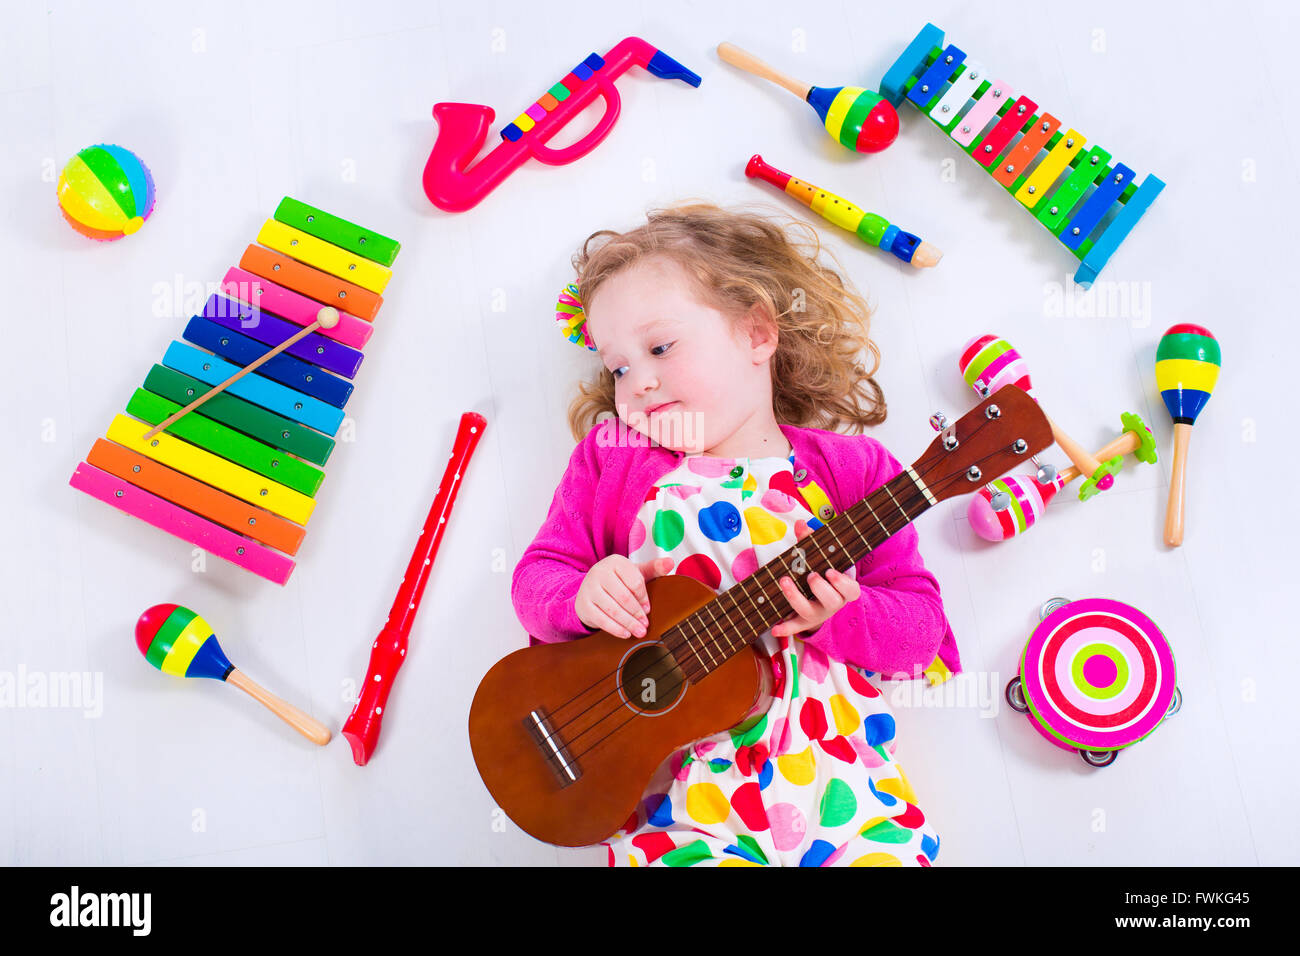 Child with music instruments. Musical education for kids. Colorful wooden art toys for kids. Little girl playing music. Stock Photo